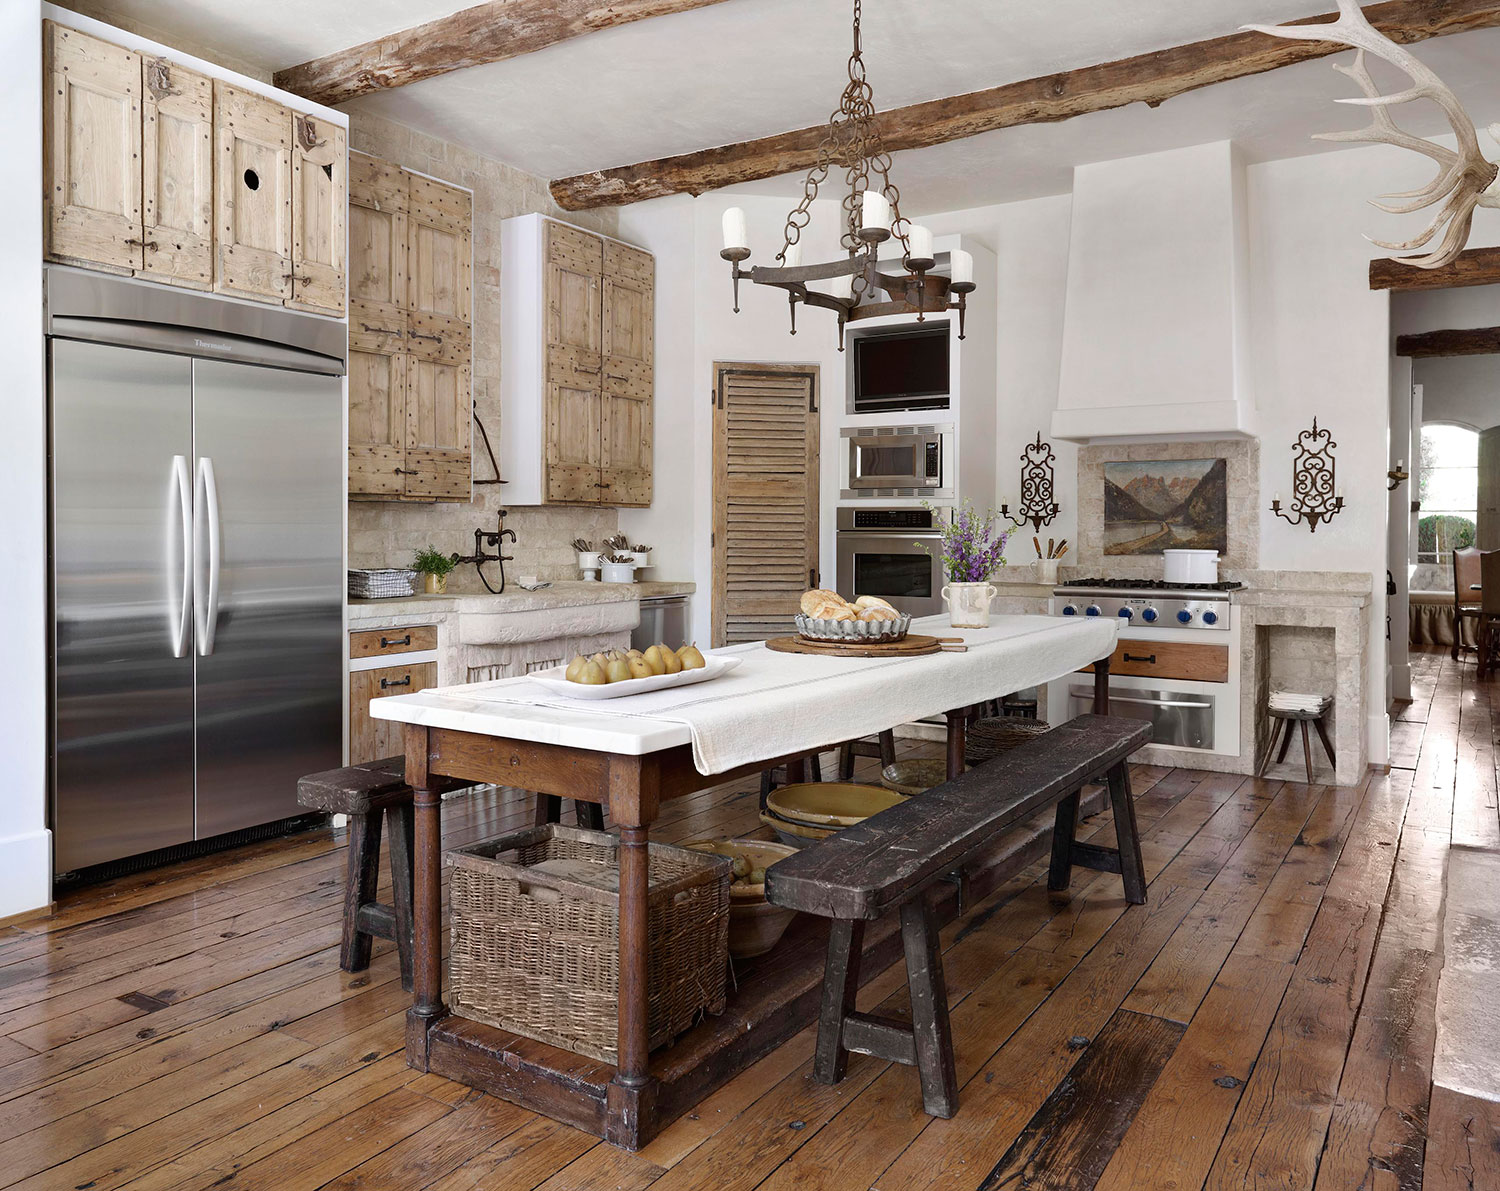 French Kitchen Design Ideas For A Lovely French Country Style